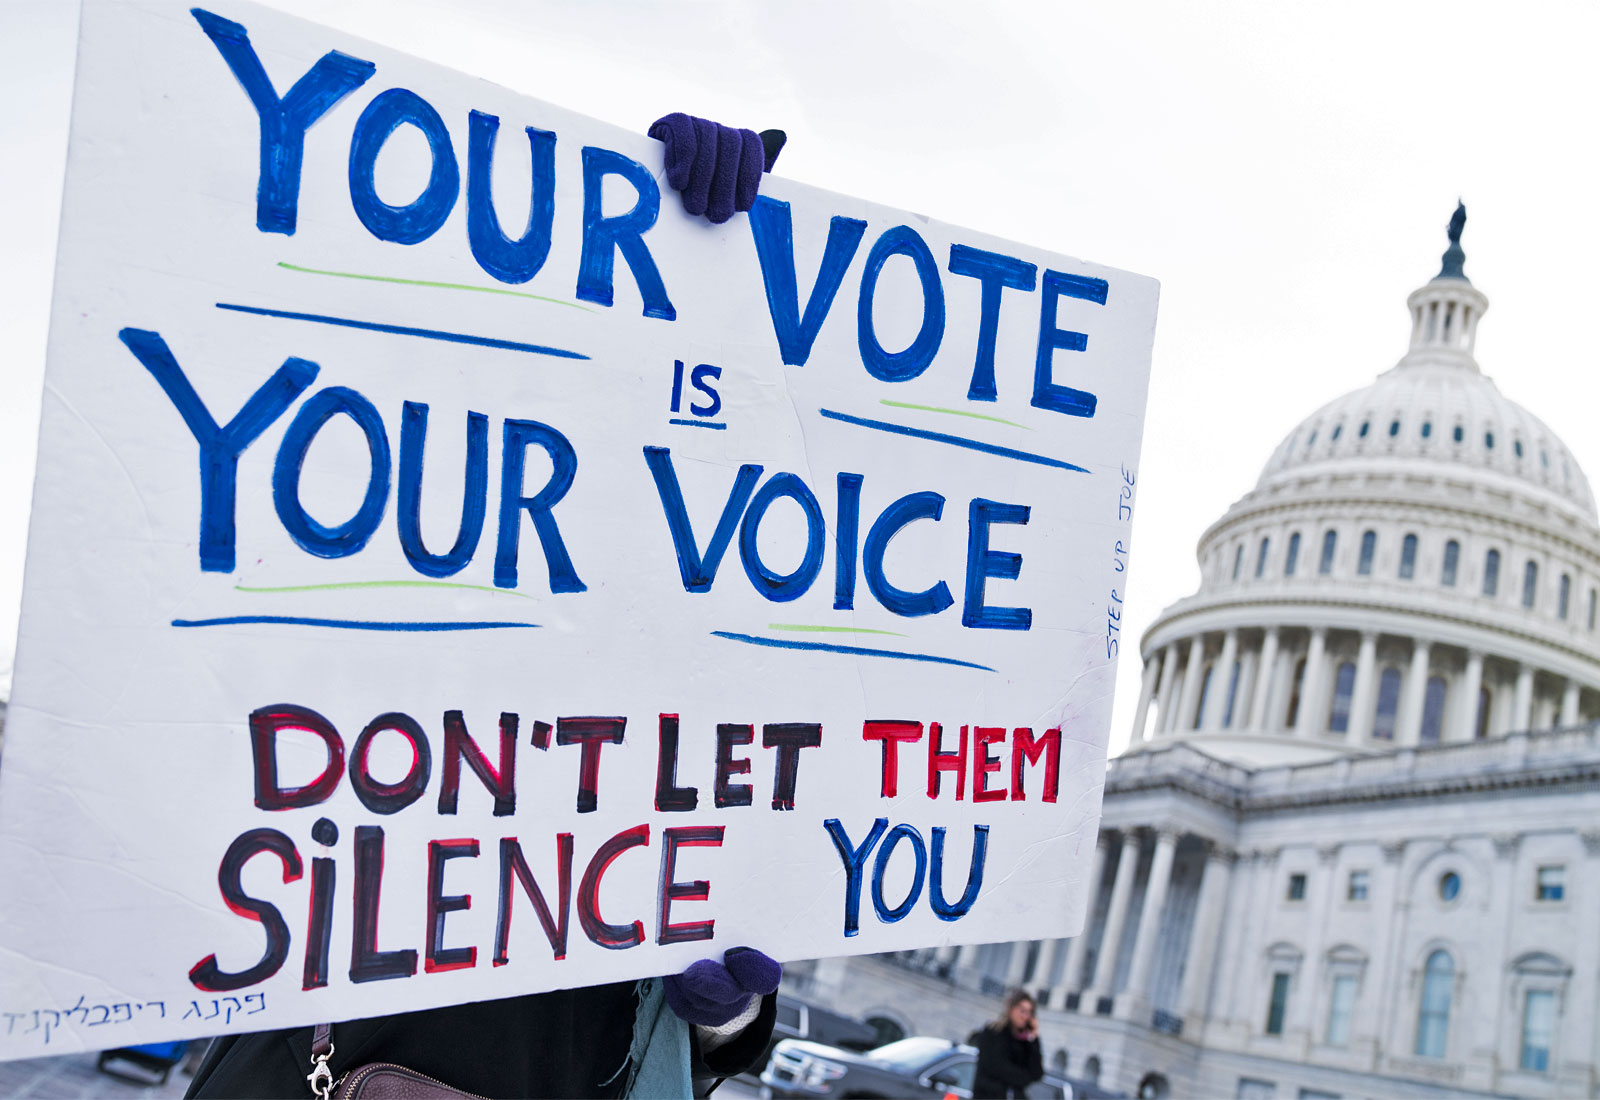 Protest sign that reads "your vote is your voice; don't let them silence you"